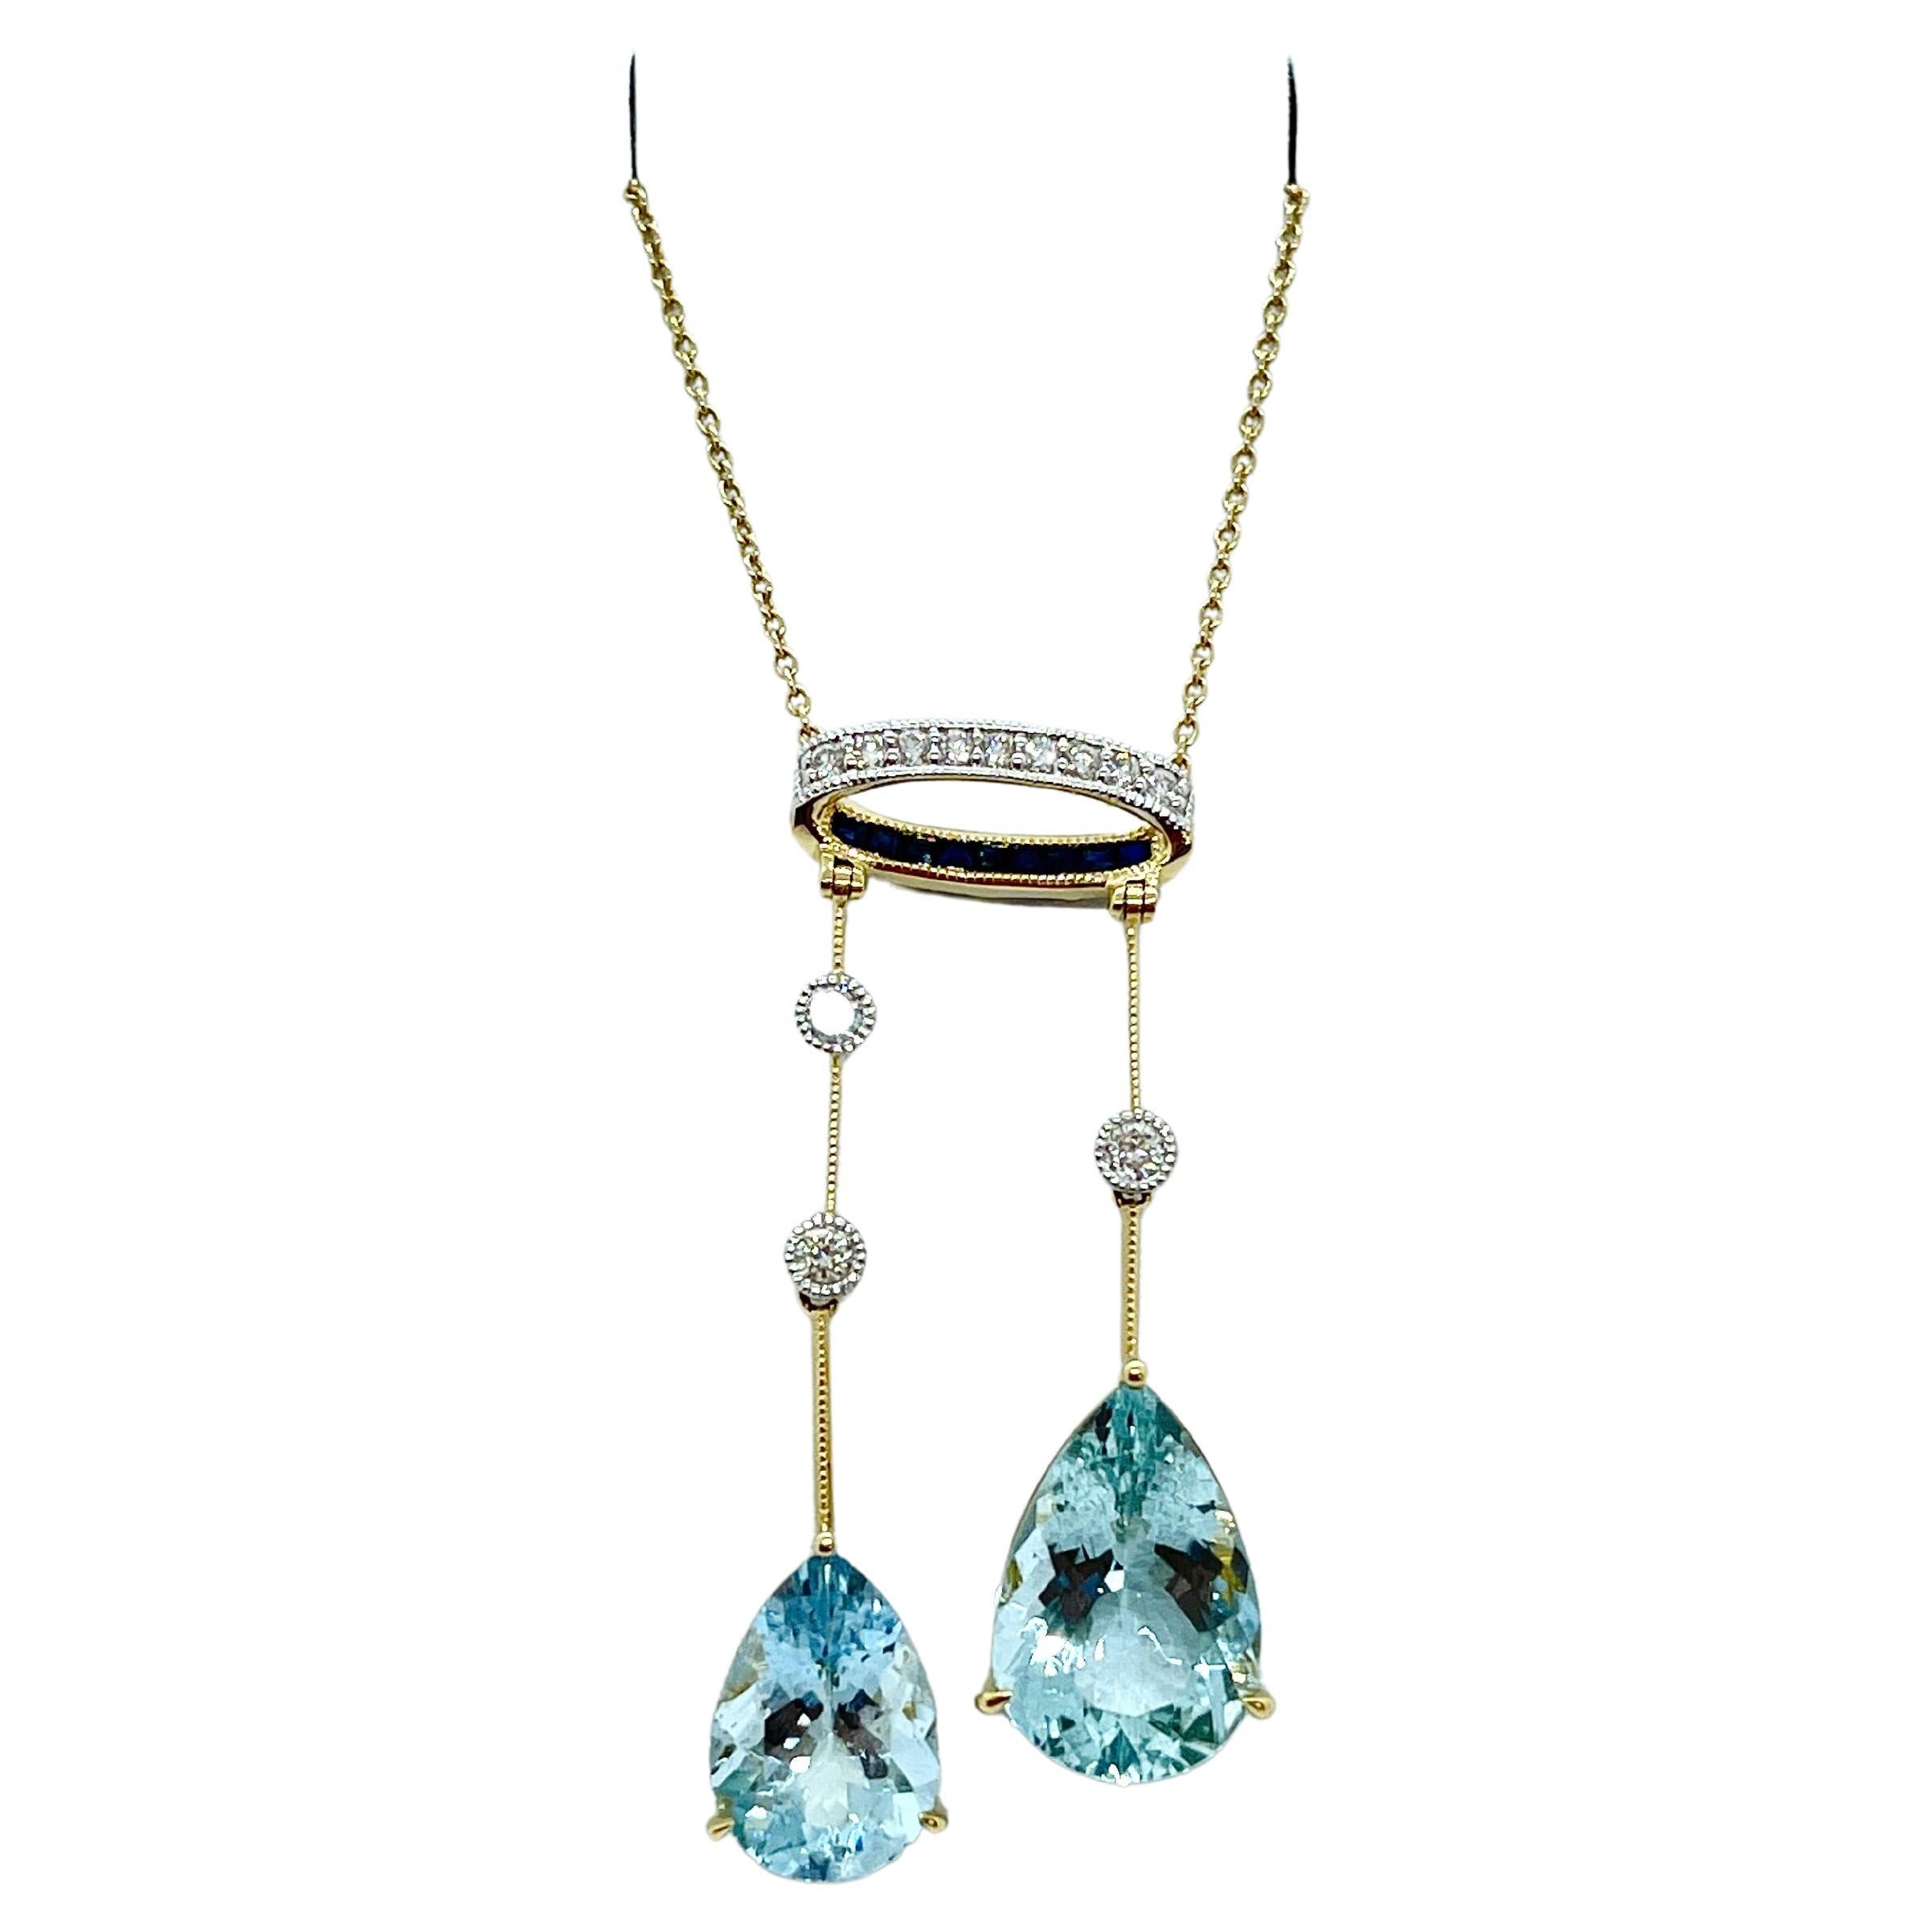 Natural Pear Shaped Aquamarine Diamond, Sapphire Pendant Necklace with Valuation